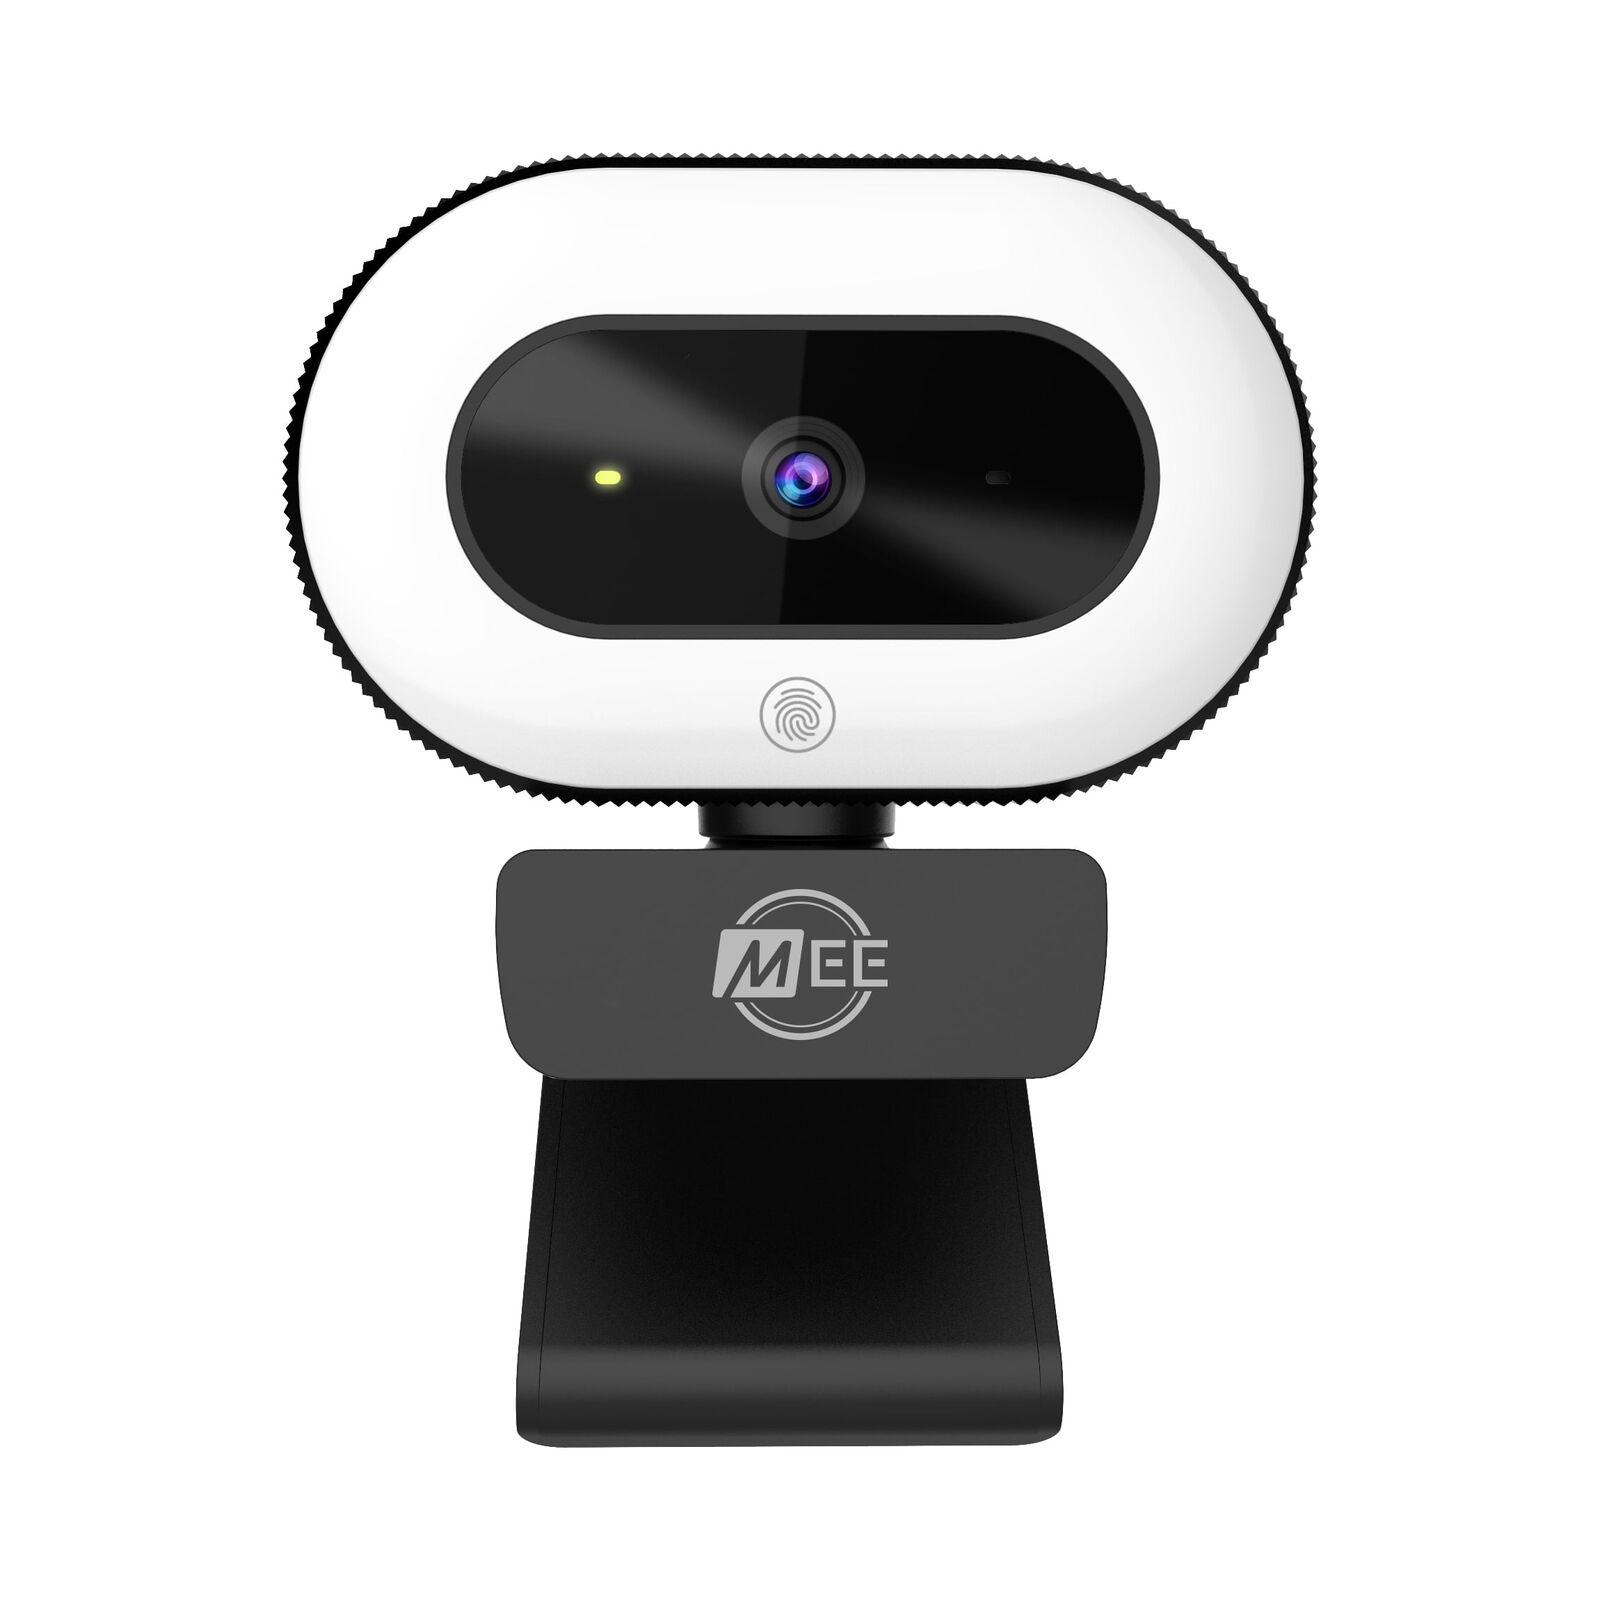 MEE audio 1080p HD USB Webcam with Built-In LED Light, Autofocus, and Microphone